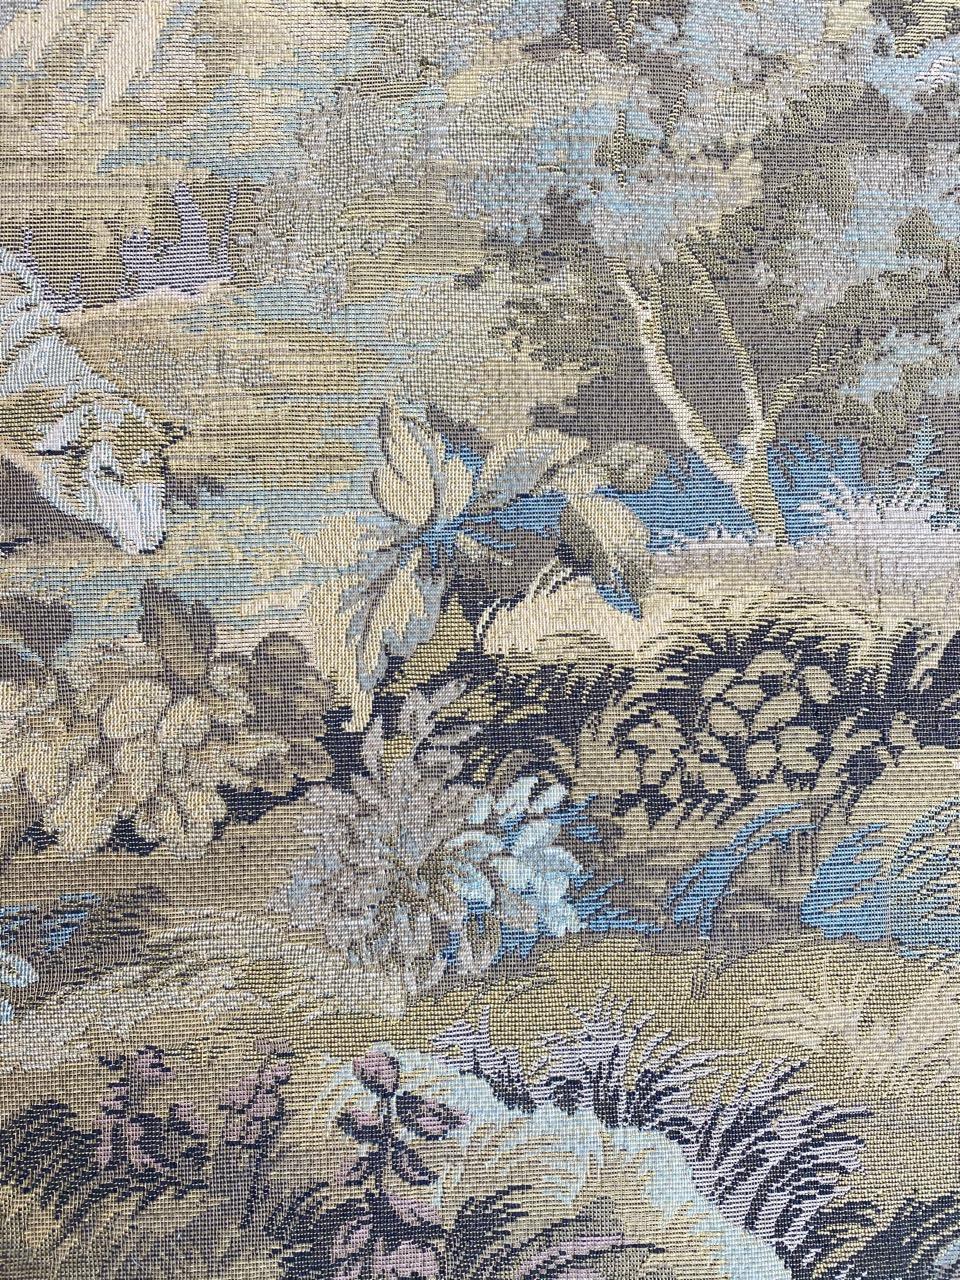 Cotton Vintage French Jaquar Tapestry